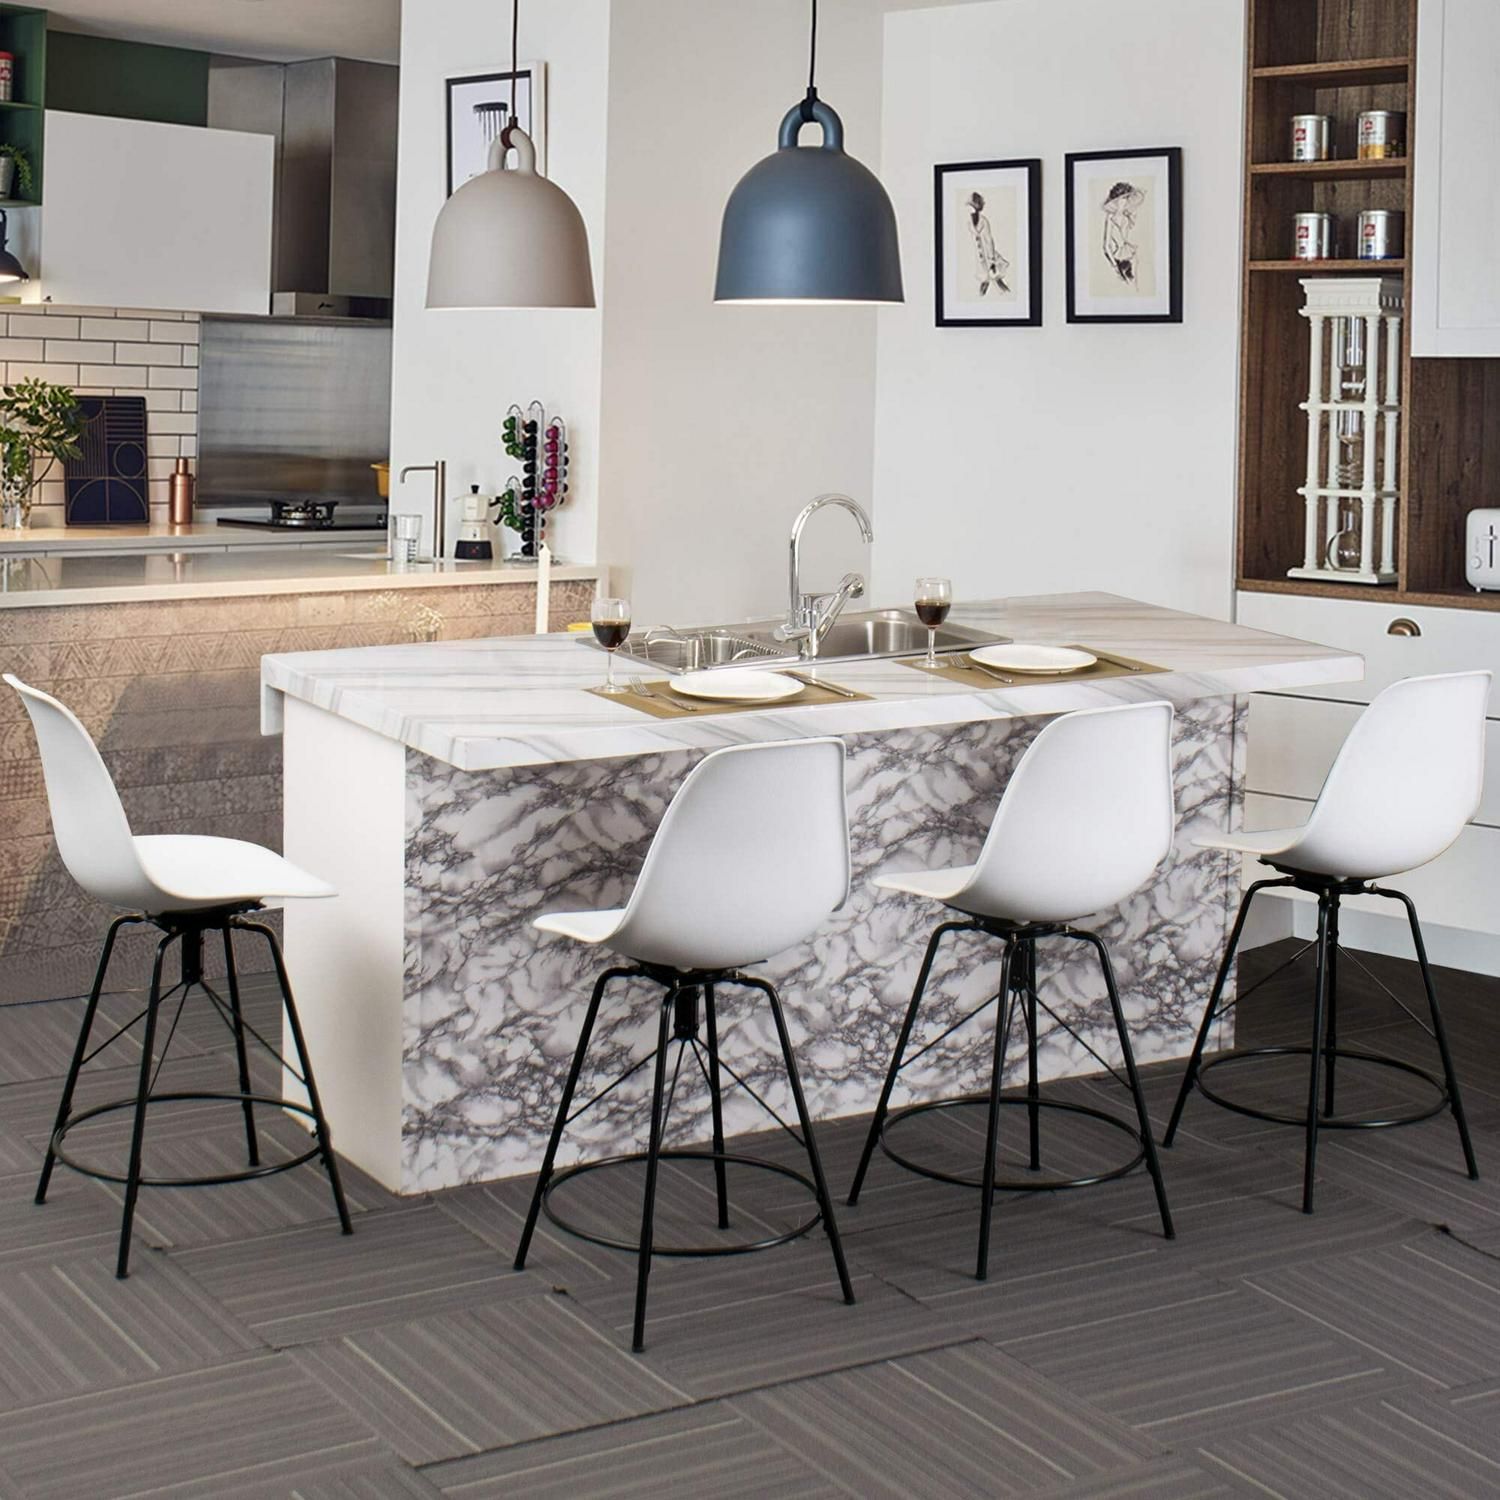 Enhance Comfort and Style with Bar Stools Featuring Arms and Swivel Functions